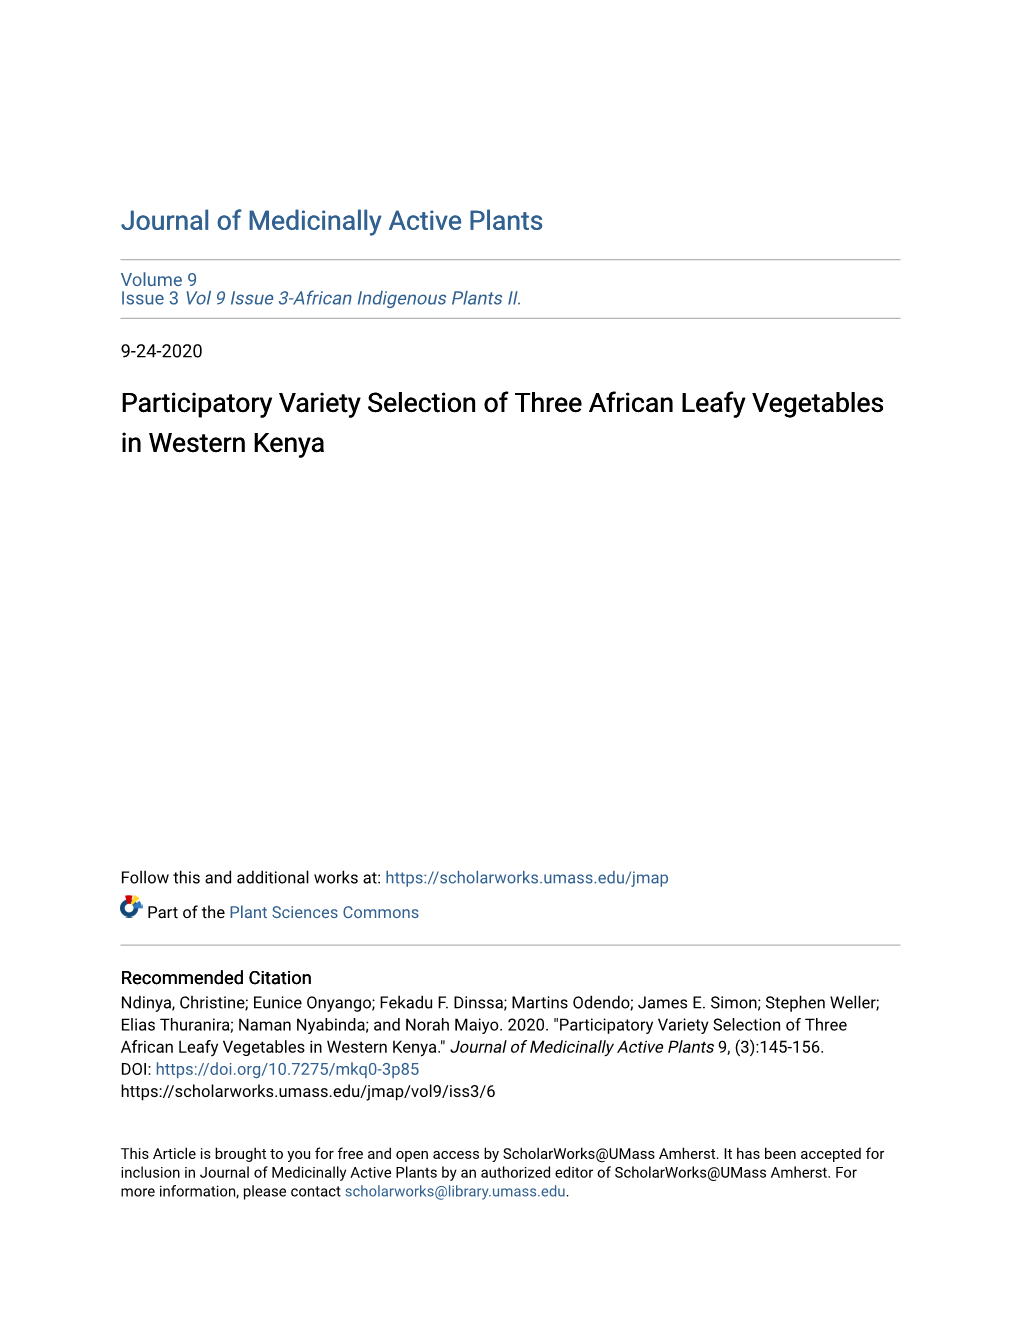 Participatory Variety Selection of Three African Leafy Vegetables in Western Kenya